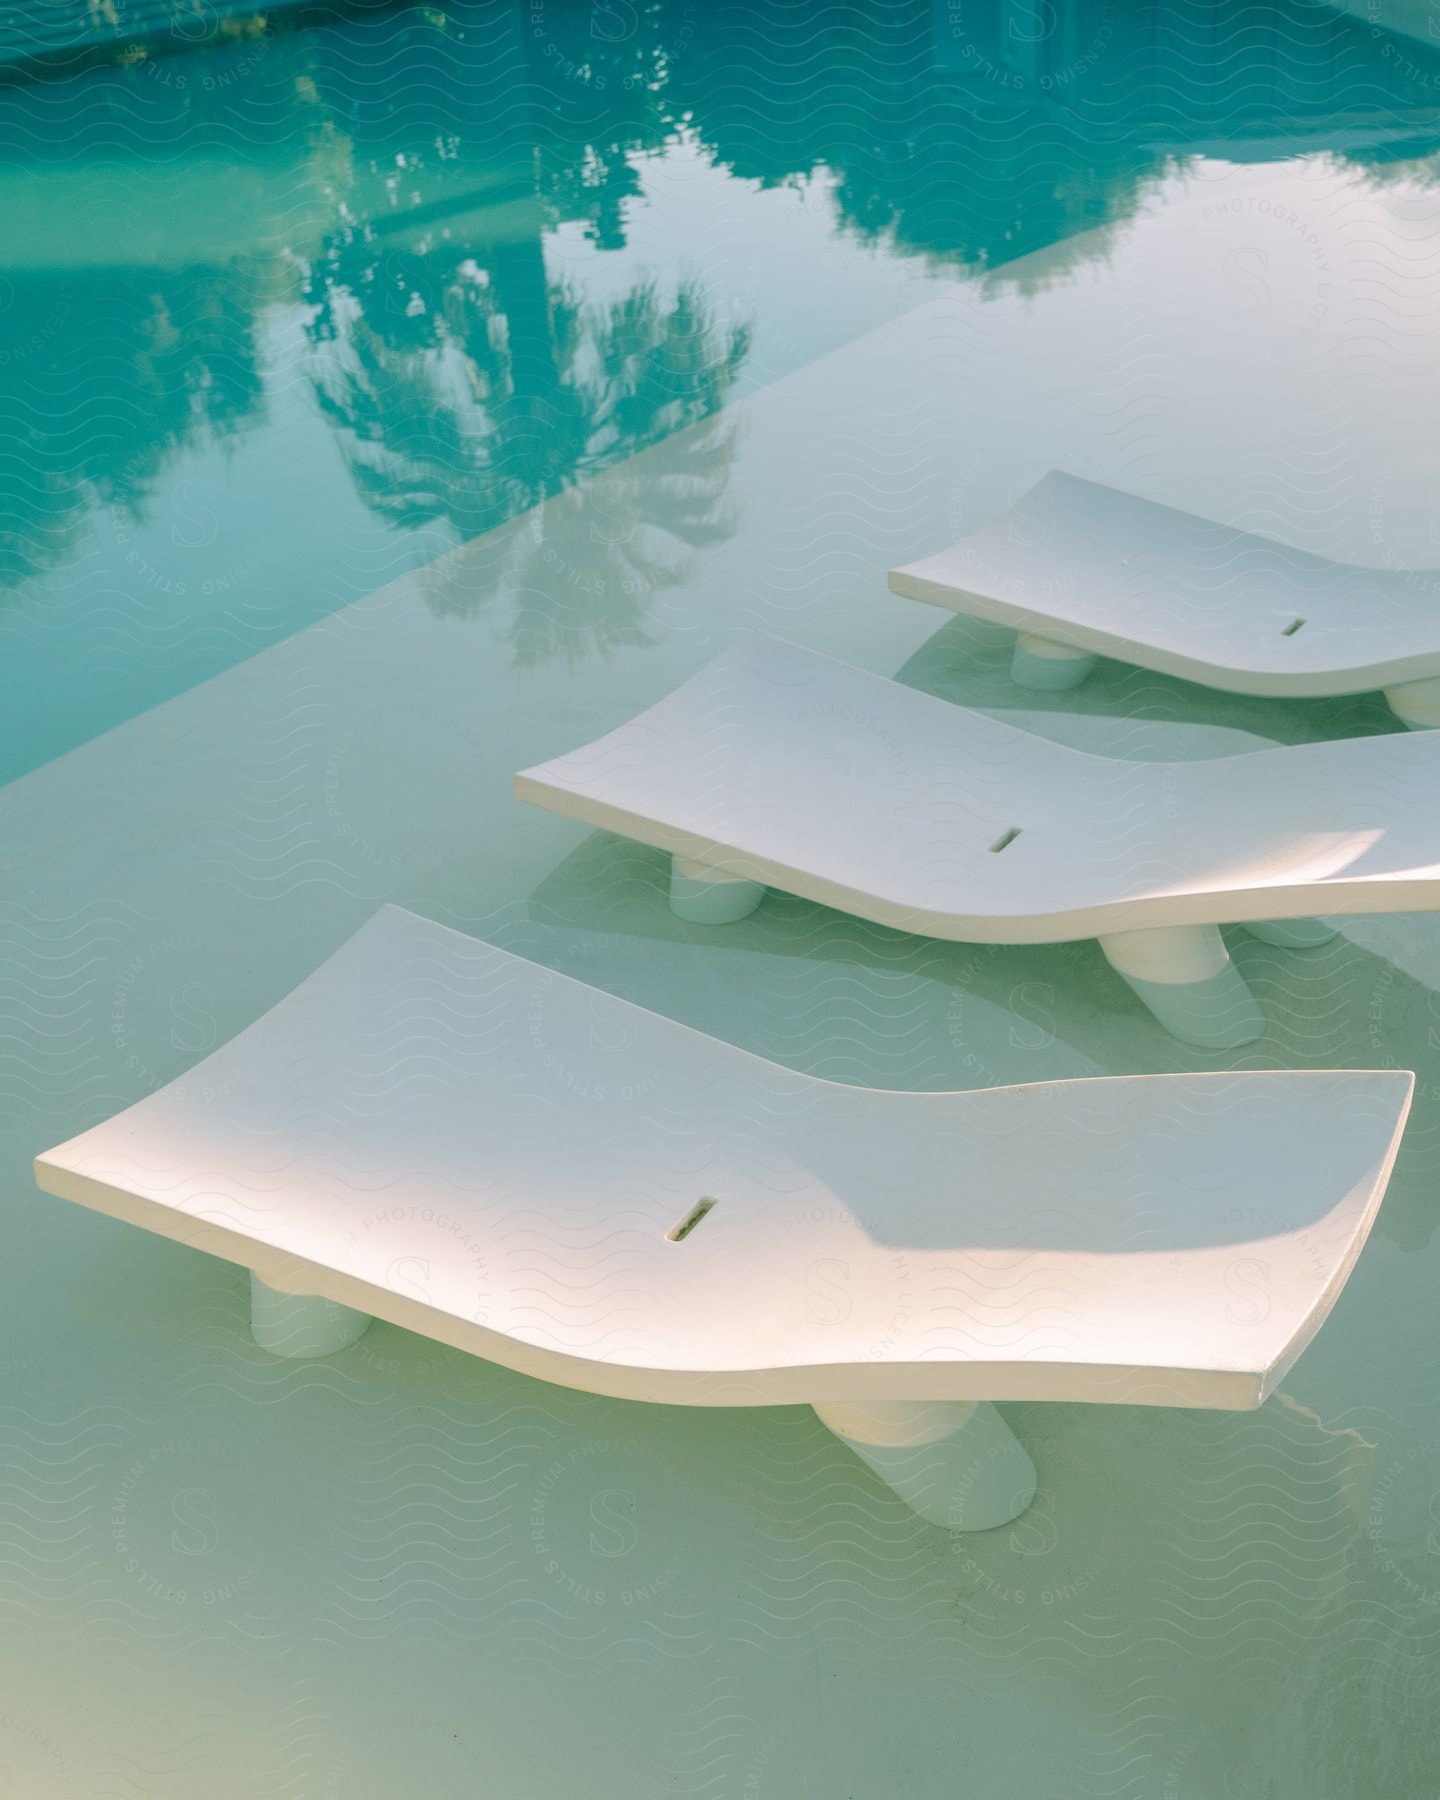 Poolside with modern white chaise lounge chairs and a reflection of a palm tree on the pool during daytime